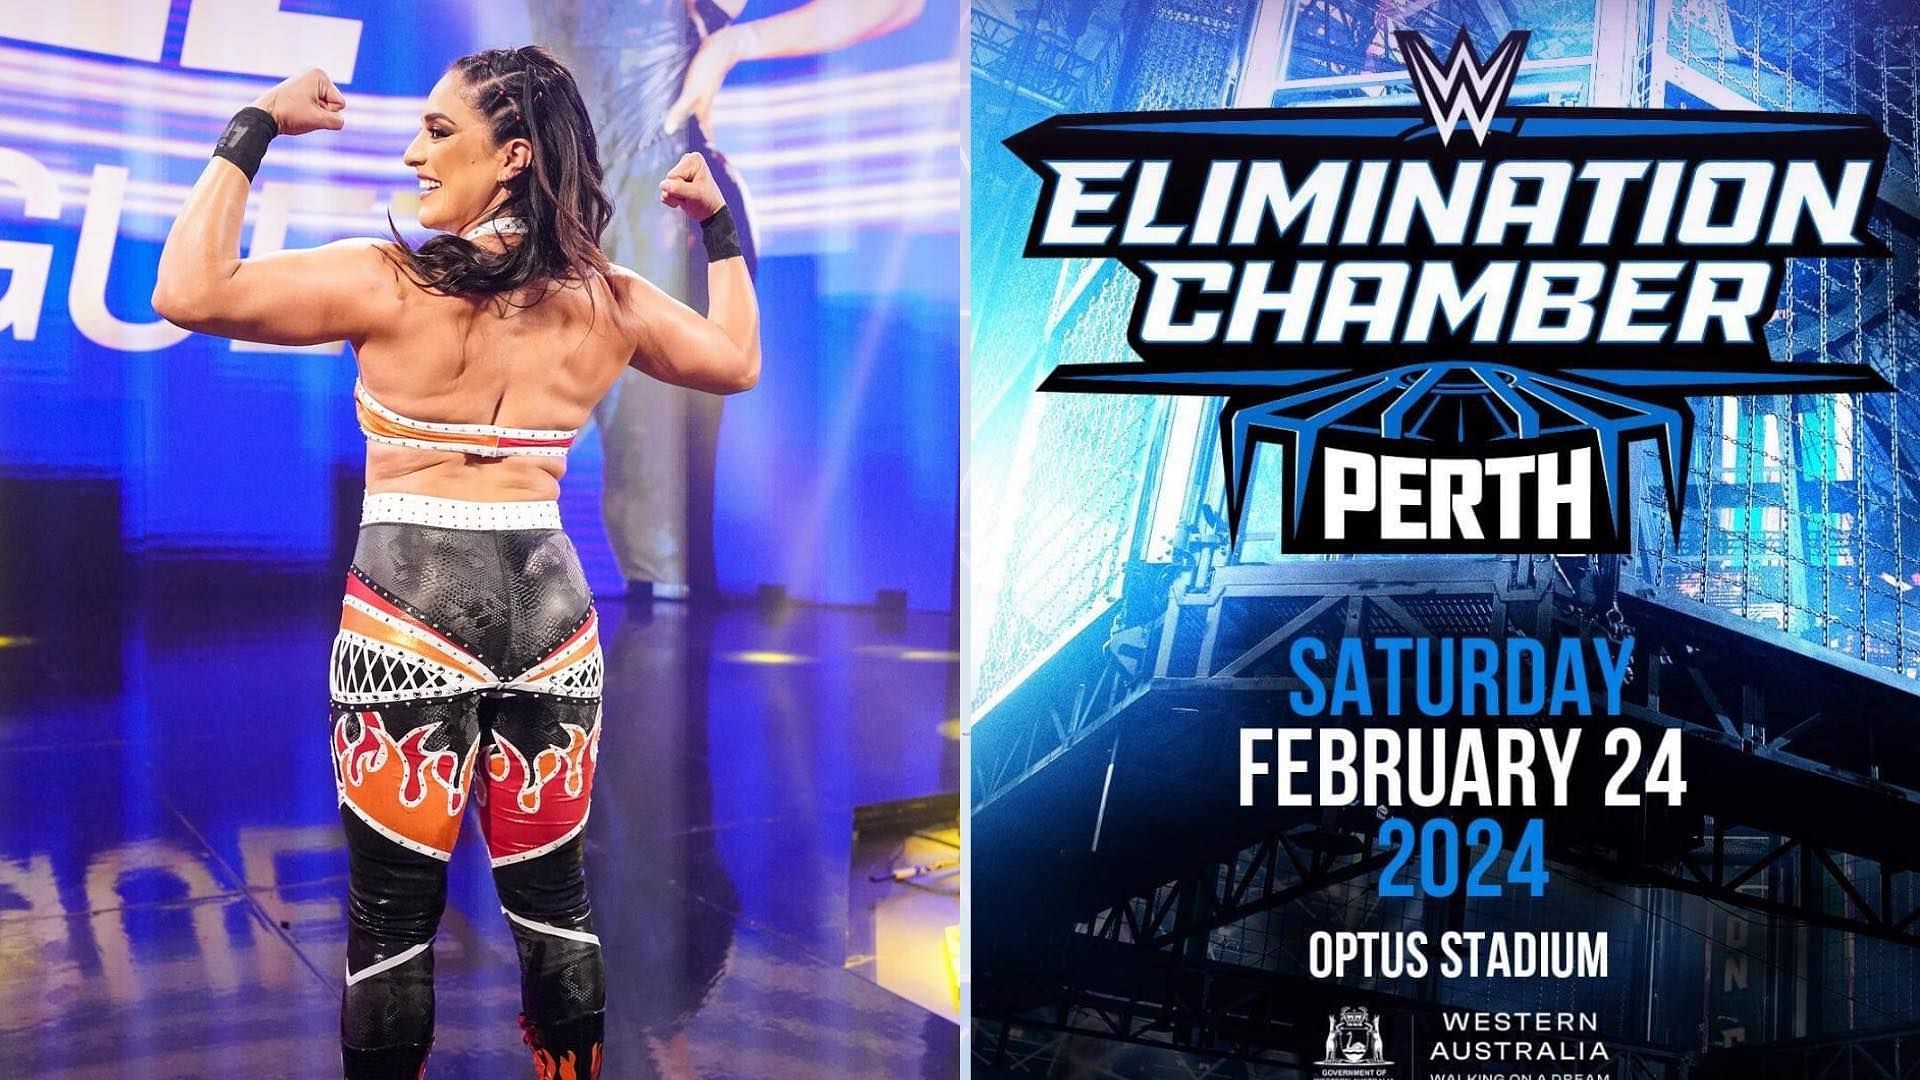 Raquel Rodriguez is looking to win the Elimination Chamber match and face Rhea Ripley.